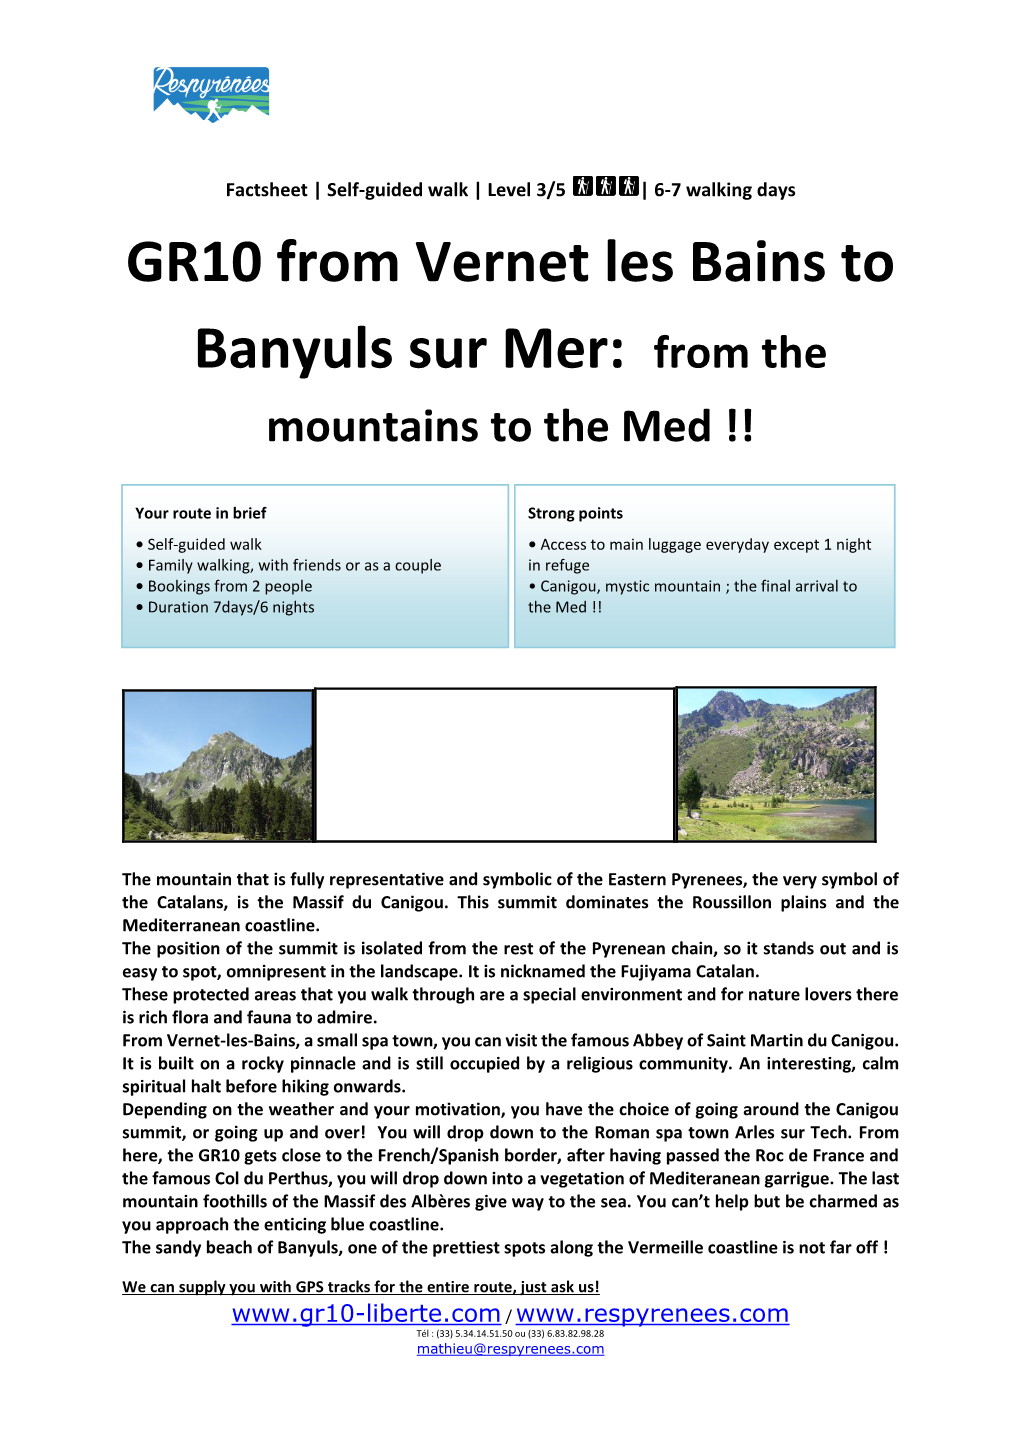 GR10 from Vernet Les Bains to Banyuls Sur Mer: from the Mountains to the Med !!